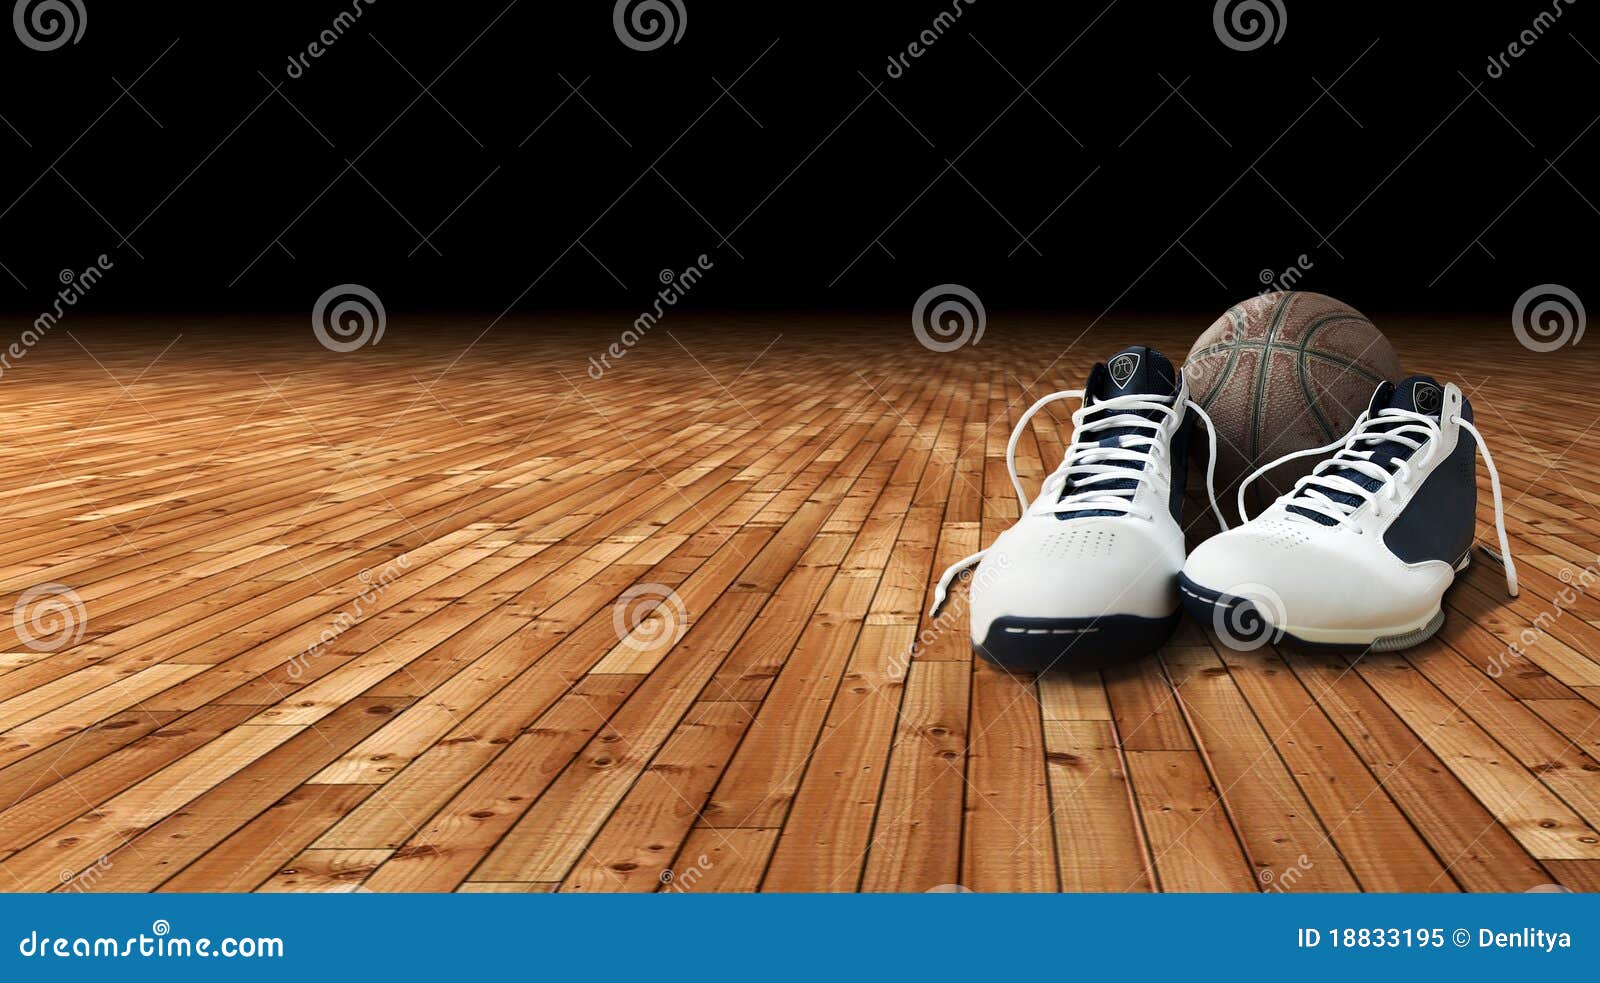 basketball shoes and ball on the court